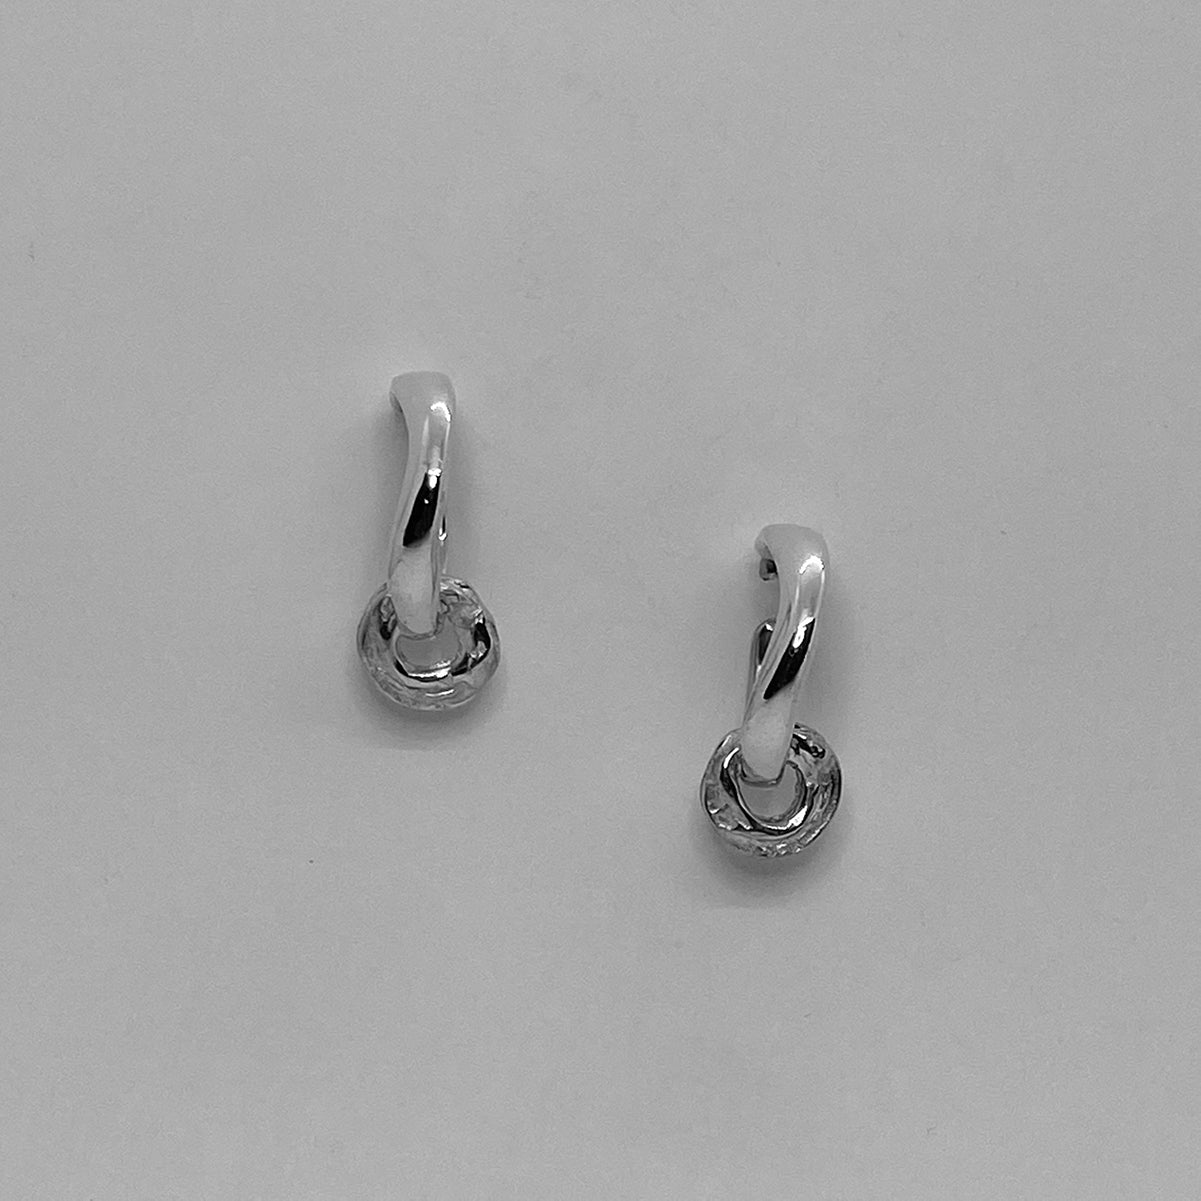 Wavy handmade hoops, one inside the other, made of sterling silver 925